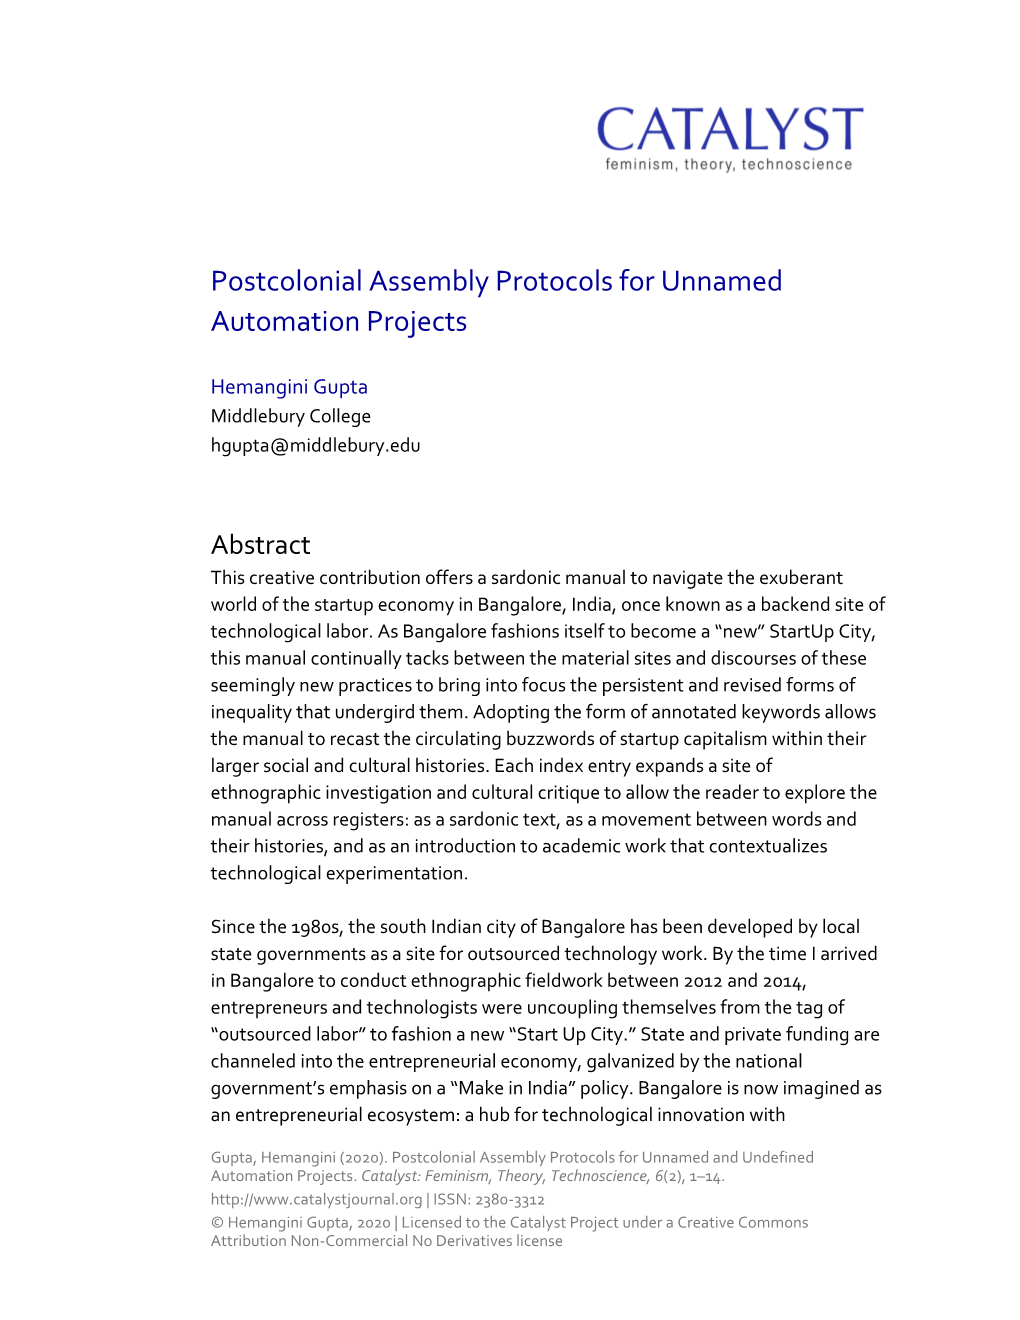 Postcolonial Assembly Protocols for Unnamed Automation Projects